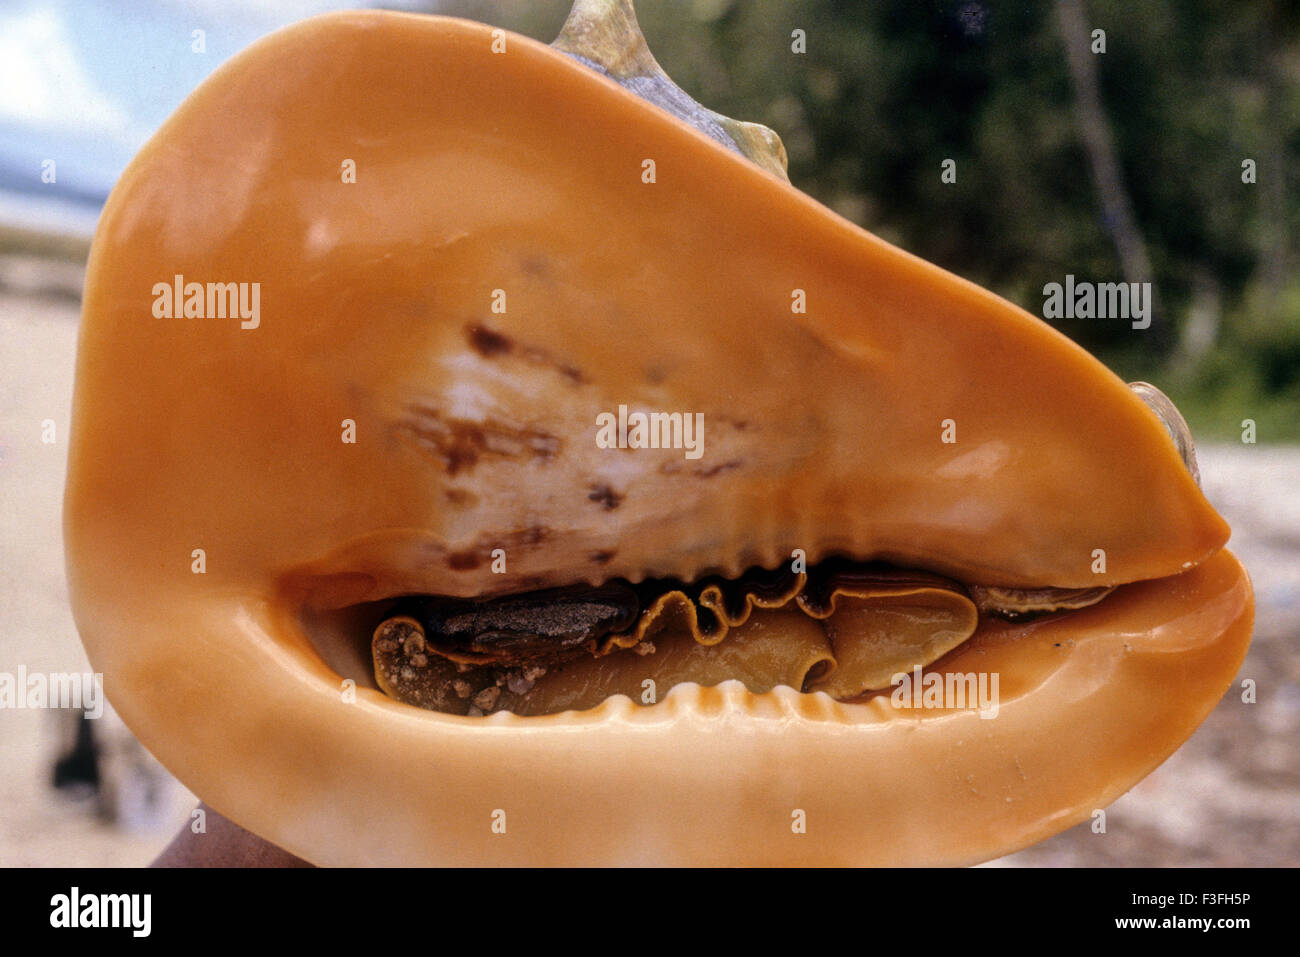 conch ; sea snail ; phylum Mollusca ; conch shell Stock Photo